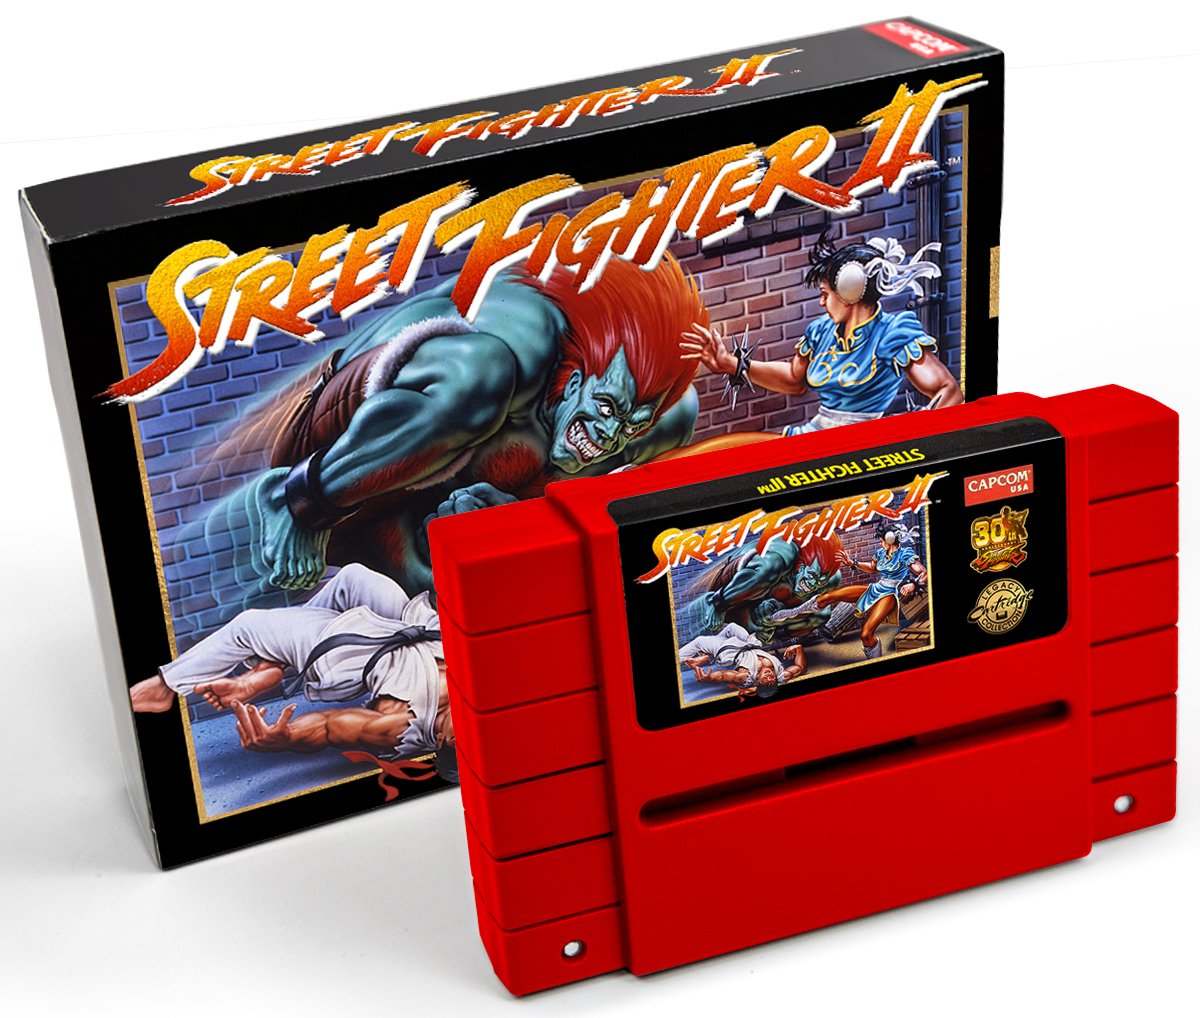 Street Fighter II' Celebrates 30th Anniversary With SNES Cartridges